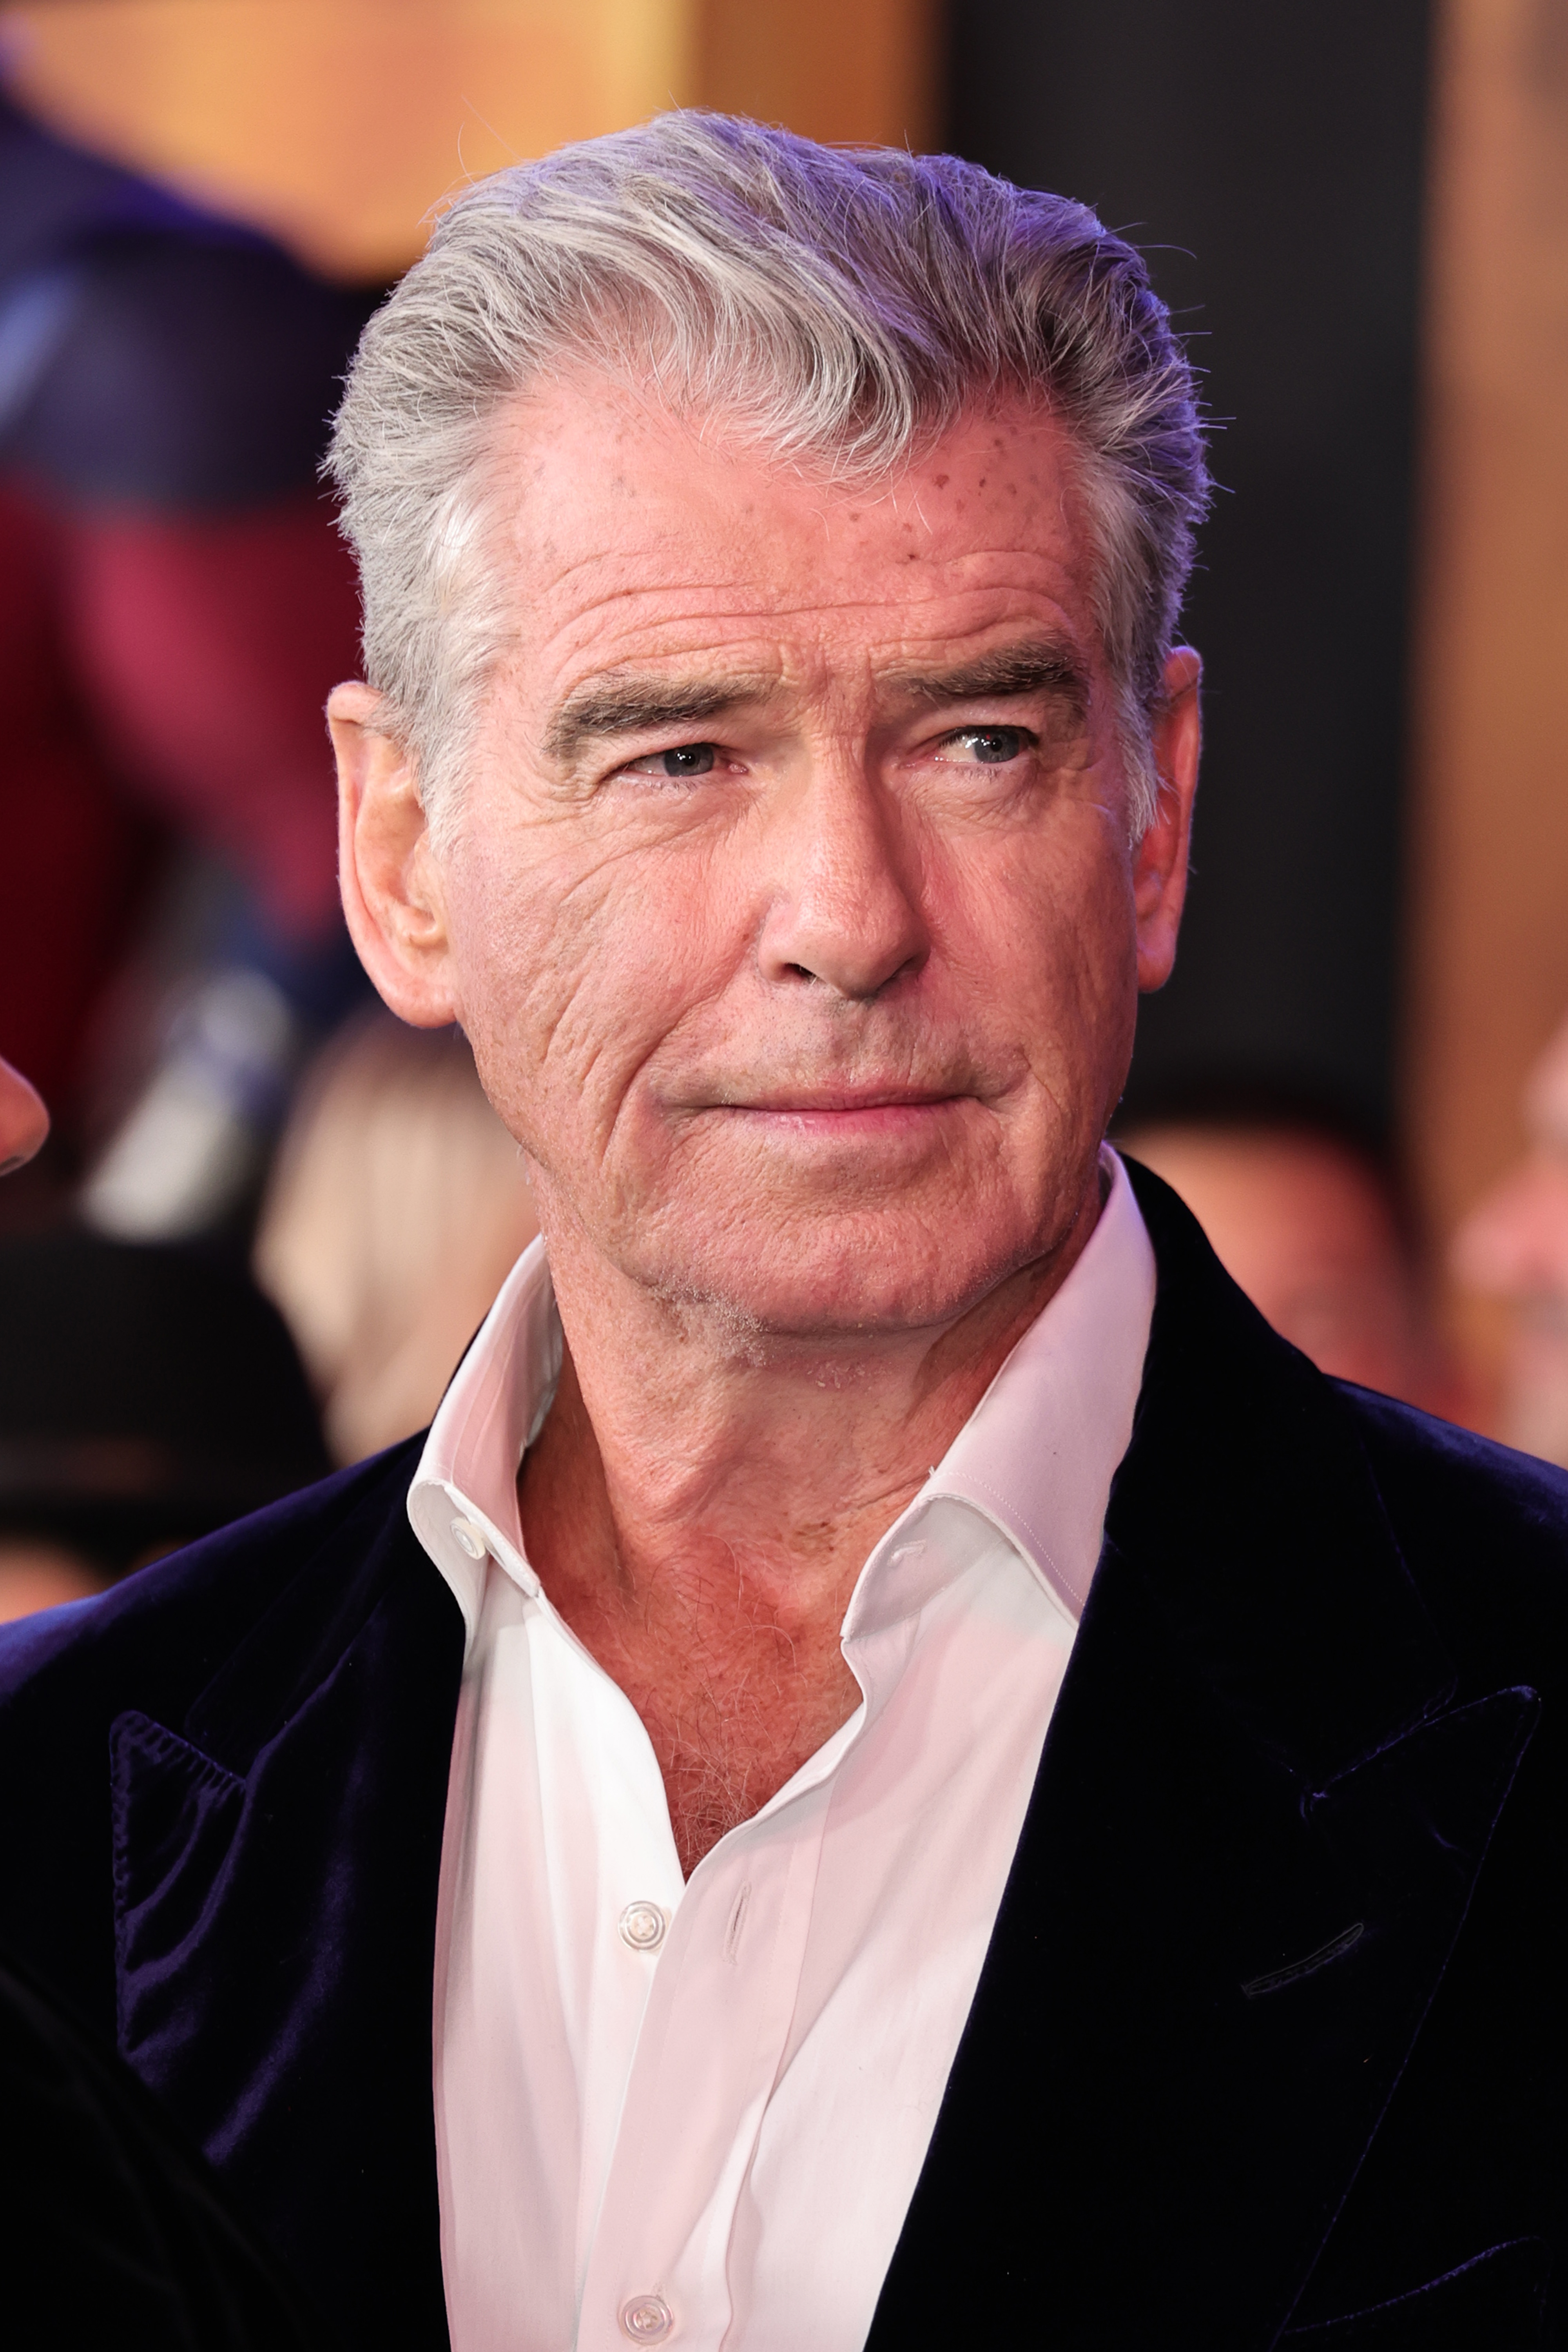 Pierce Brosnan in New York City on October 12, 2022 | Source: Getty Images